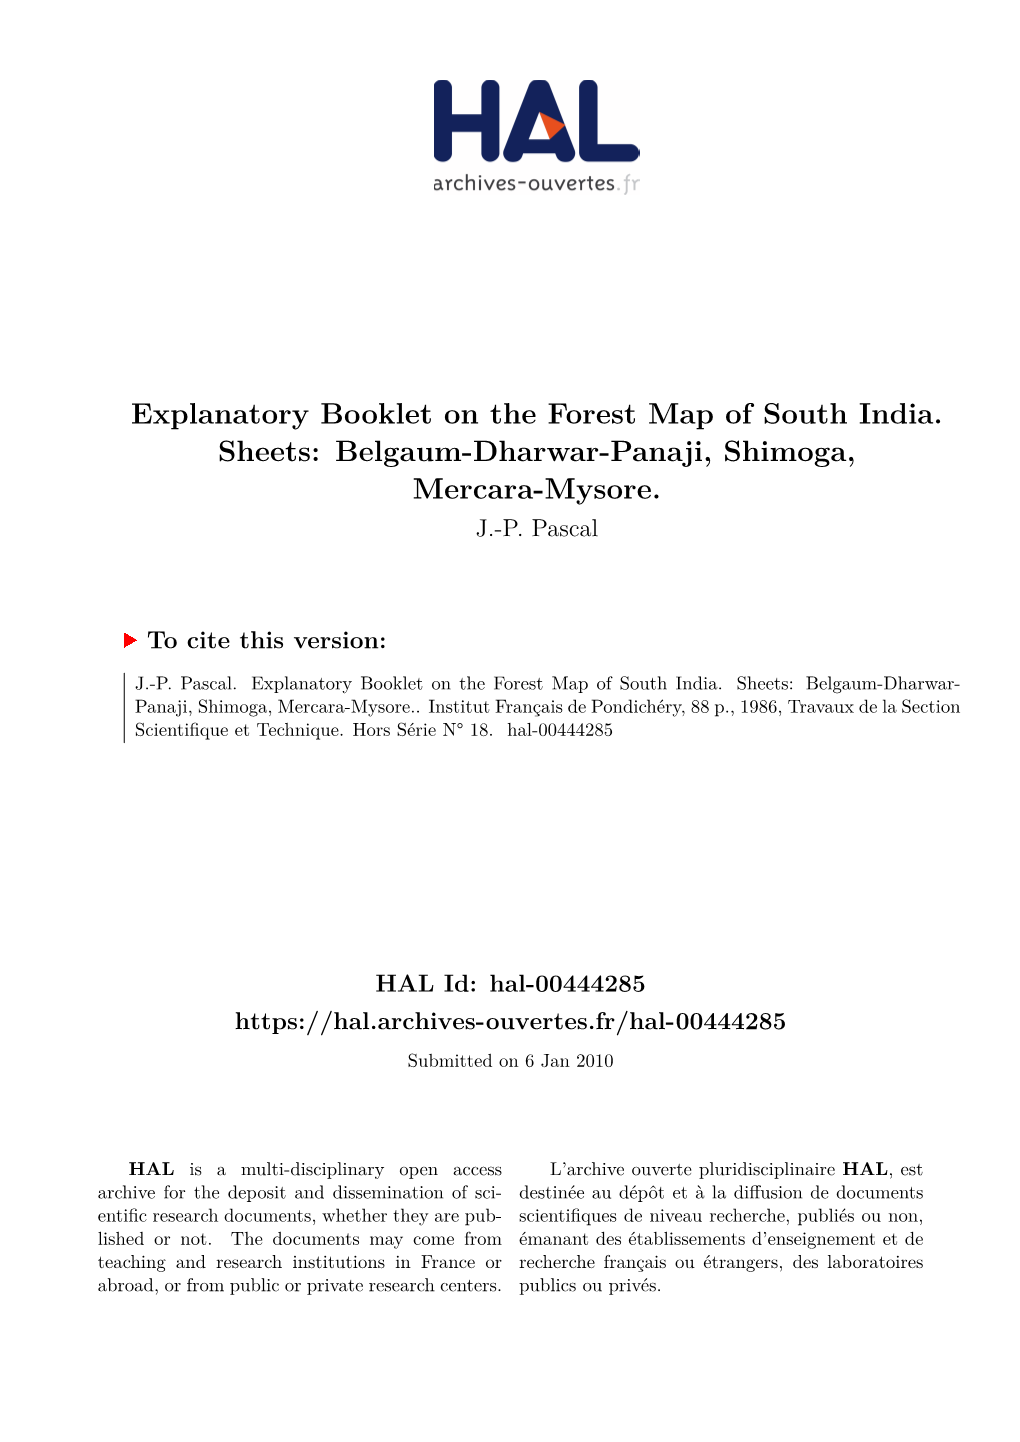 Explanatory Booklet on the Forest Map of South India